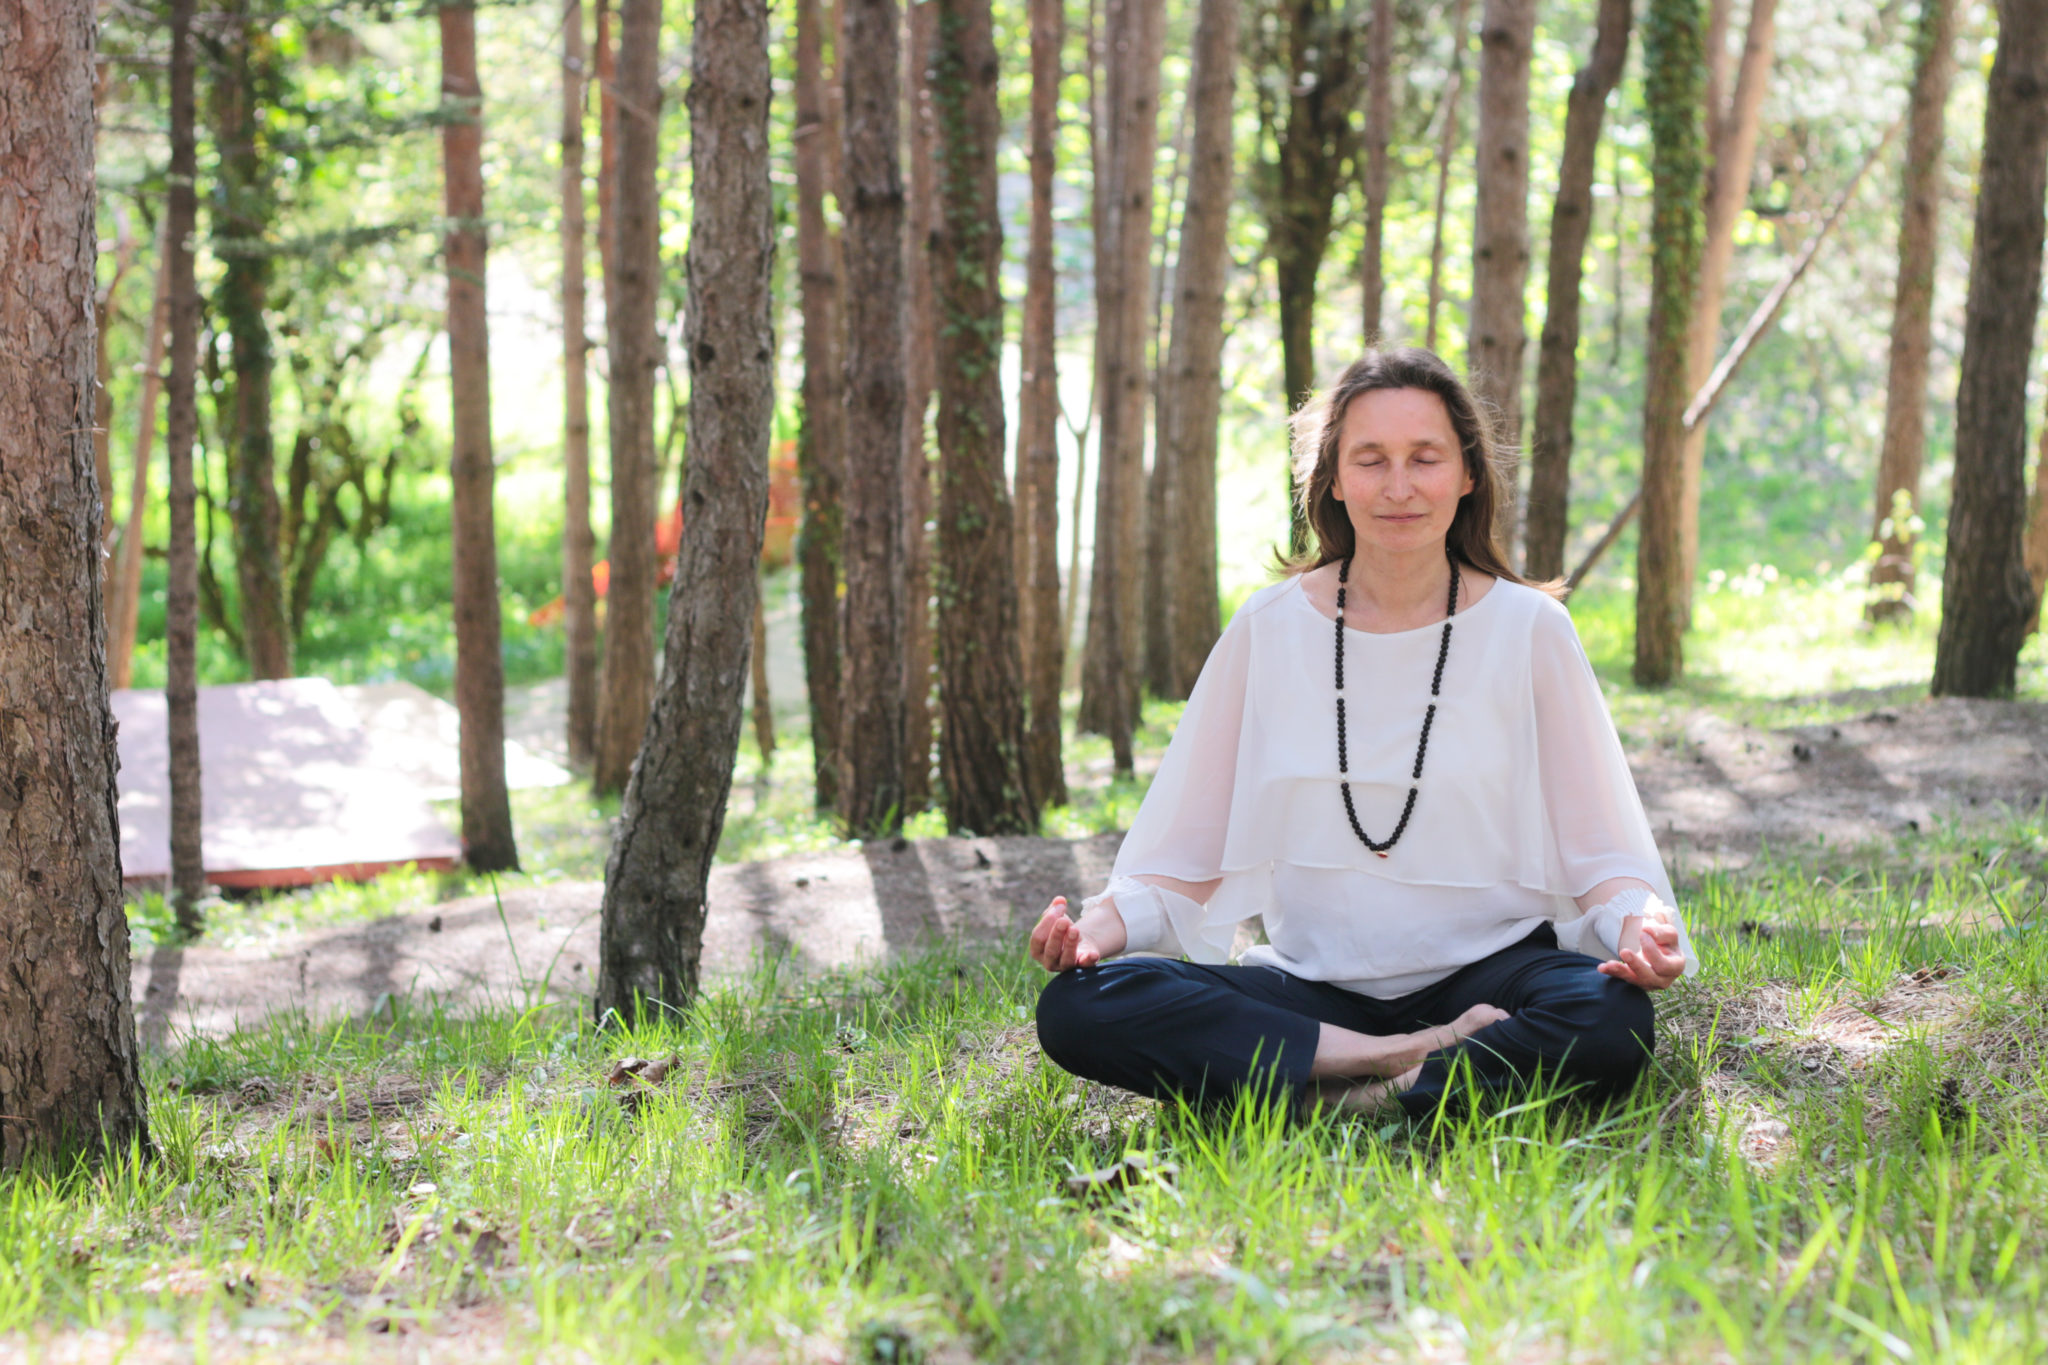 Meditation and the breath is a wonderful way to make finding calmness in daily life possible.